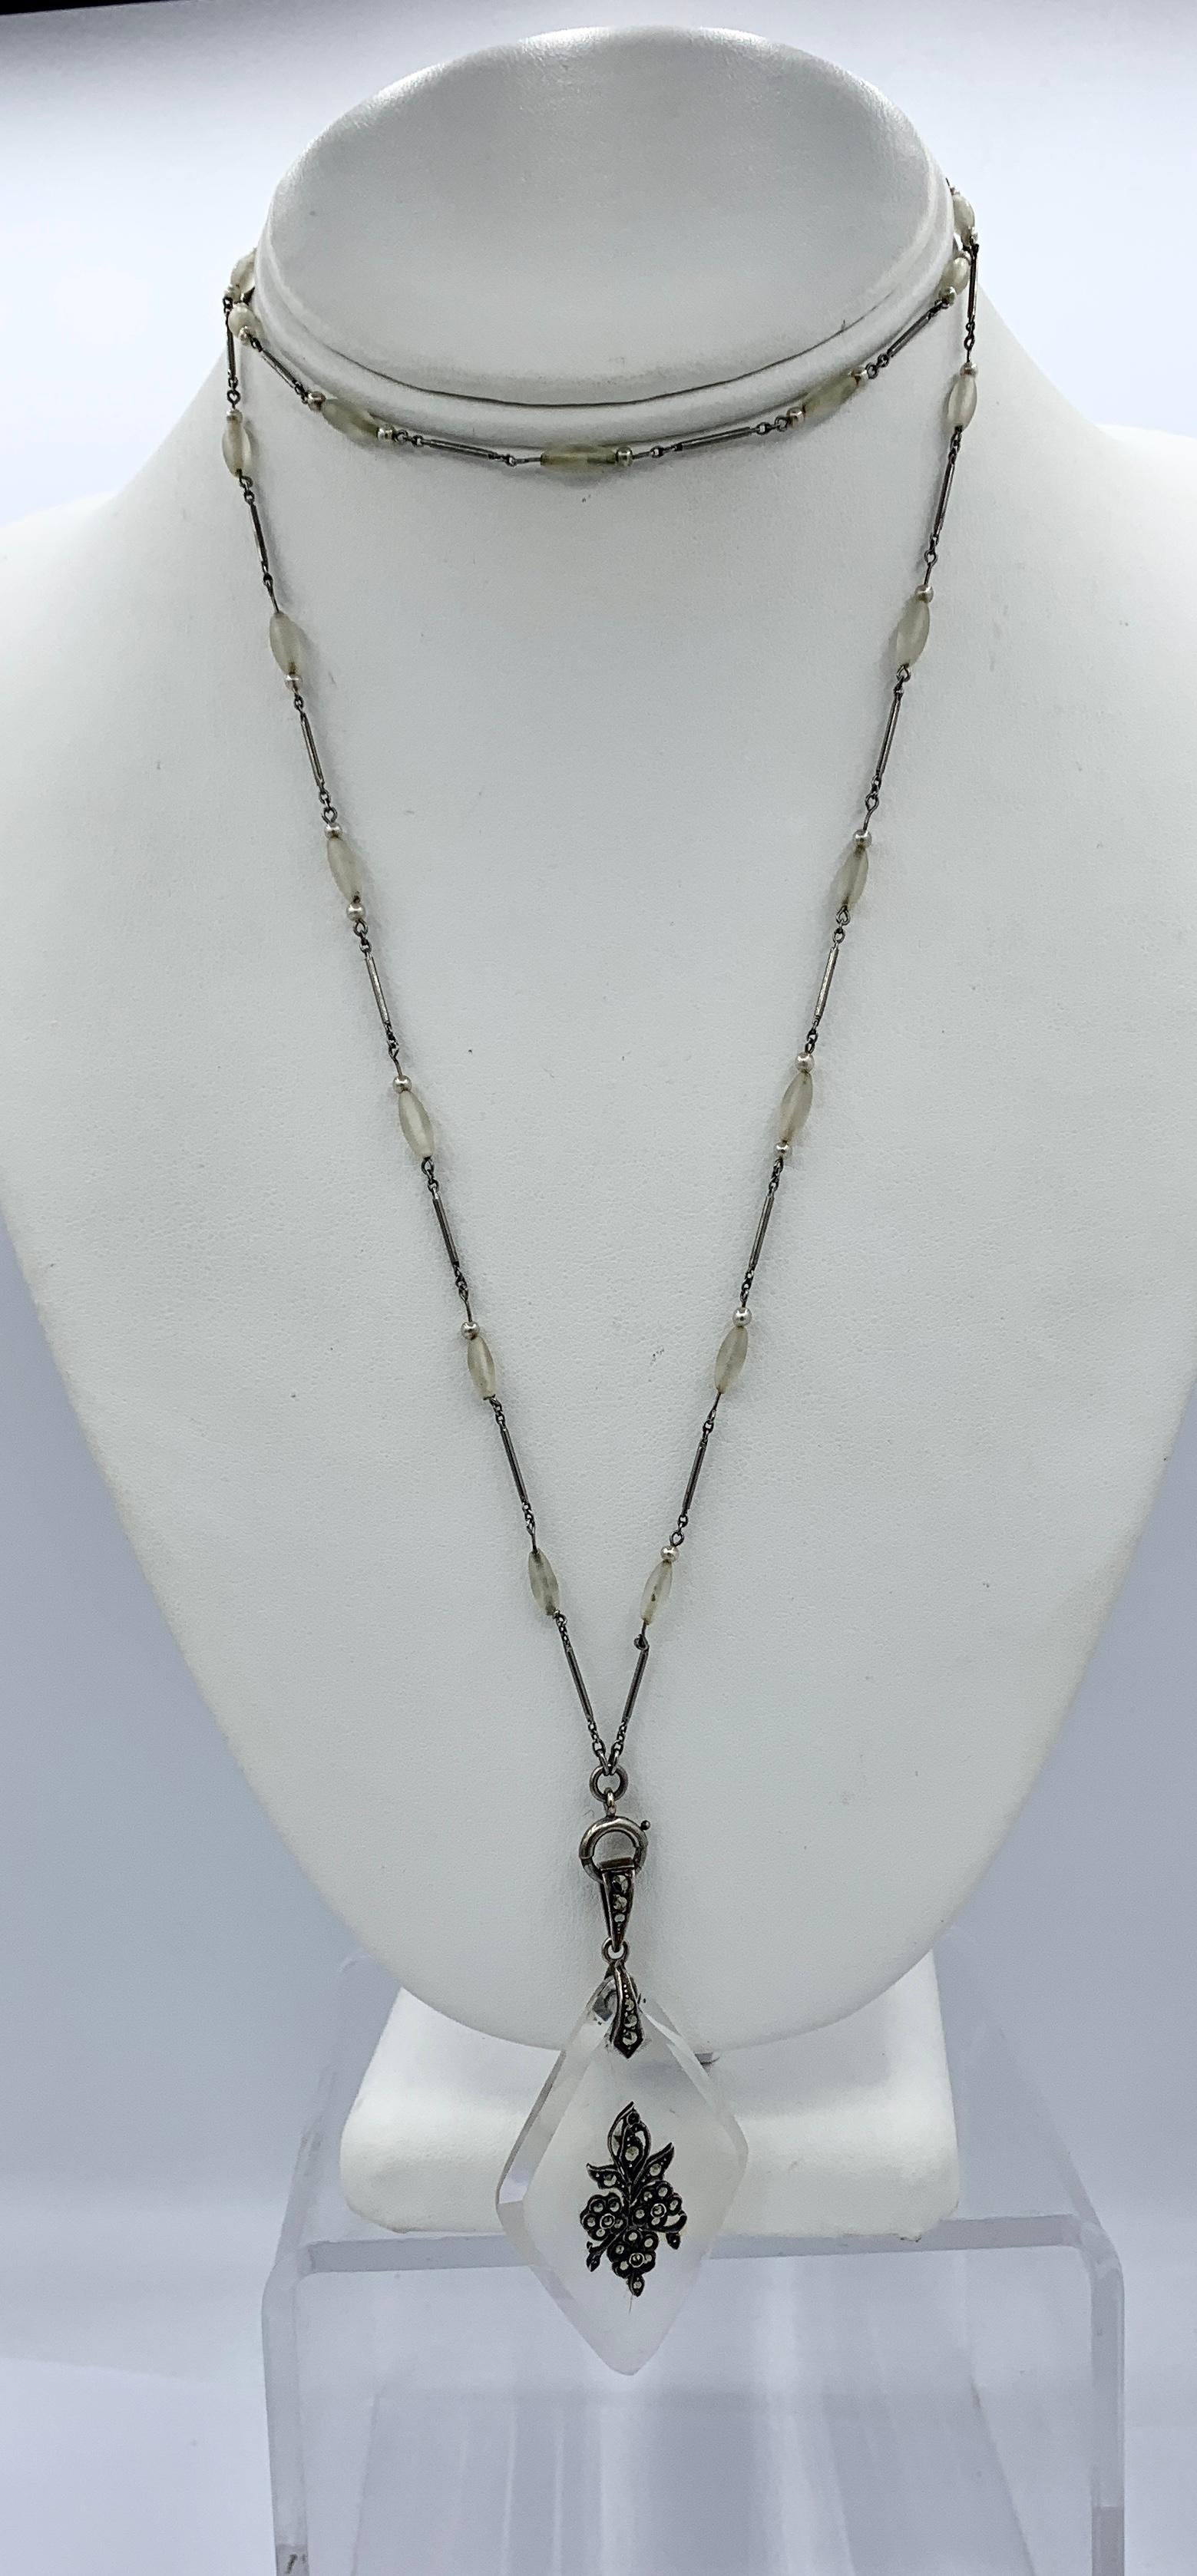 THIS IS A WONDERFUL AND VERY RARE MUSEUM QUALITY ORIGINAL ART DECO PENDANT NECKLACE WITH AN EXTRAORDINARY FLOWER MOTIF ROCK CRYSTAL PENDANT SET WITH STERLING SILVER AND MARCASITES IN A STERLING SILVER SURMOUNT WITH A MARCASITE SET BALE.  THE PENDANT